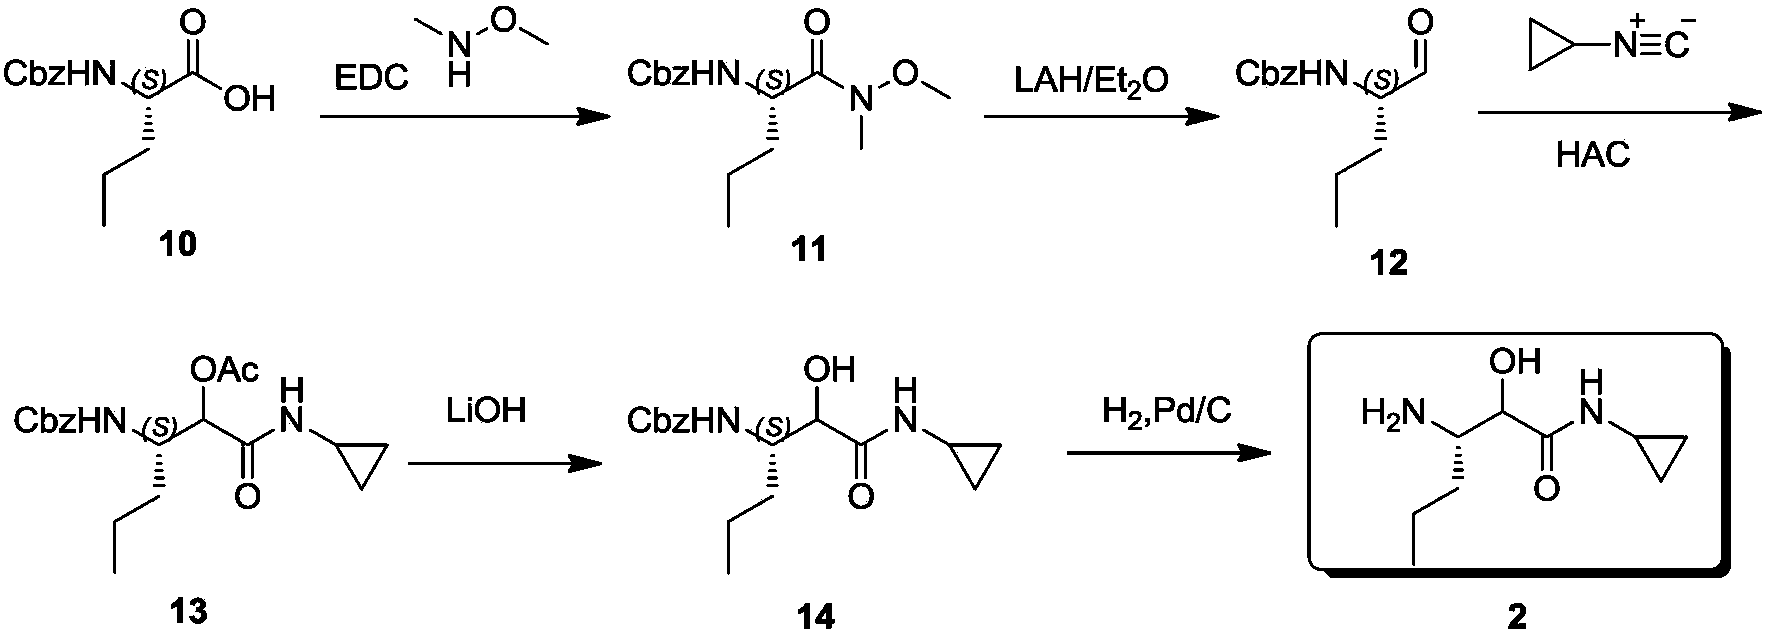 A kind of synthetic method of (3s)-3-amino-n-cyclopropyl-2-hydroxyhexanamide hydrochloride